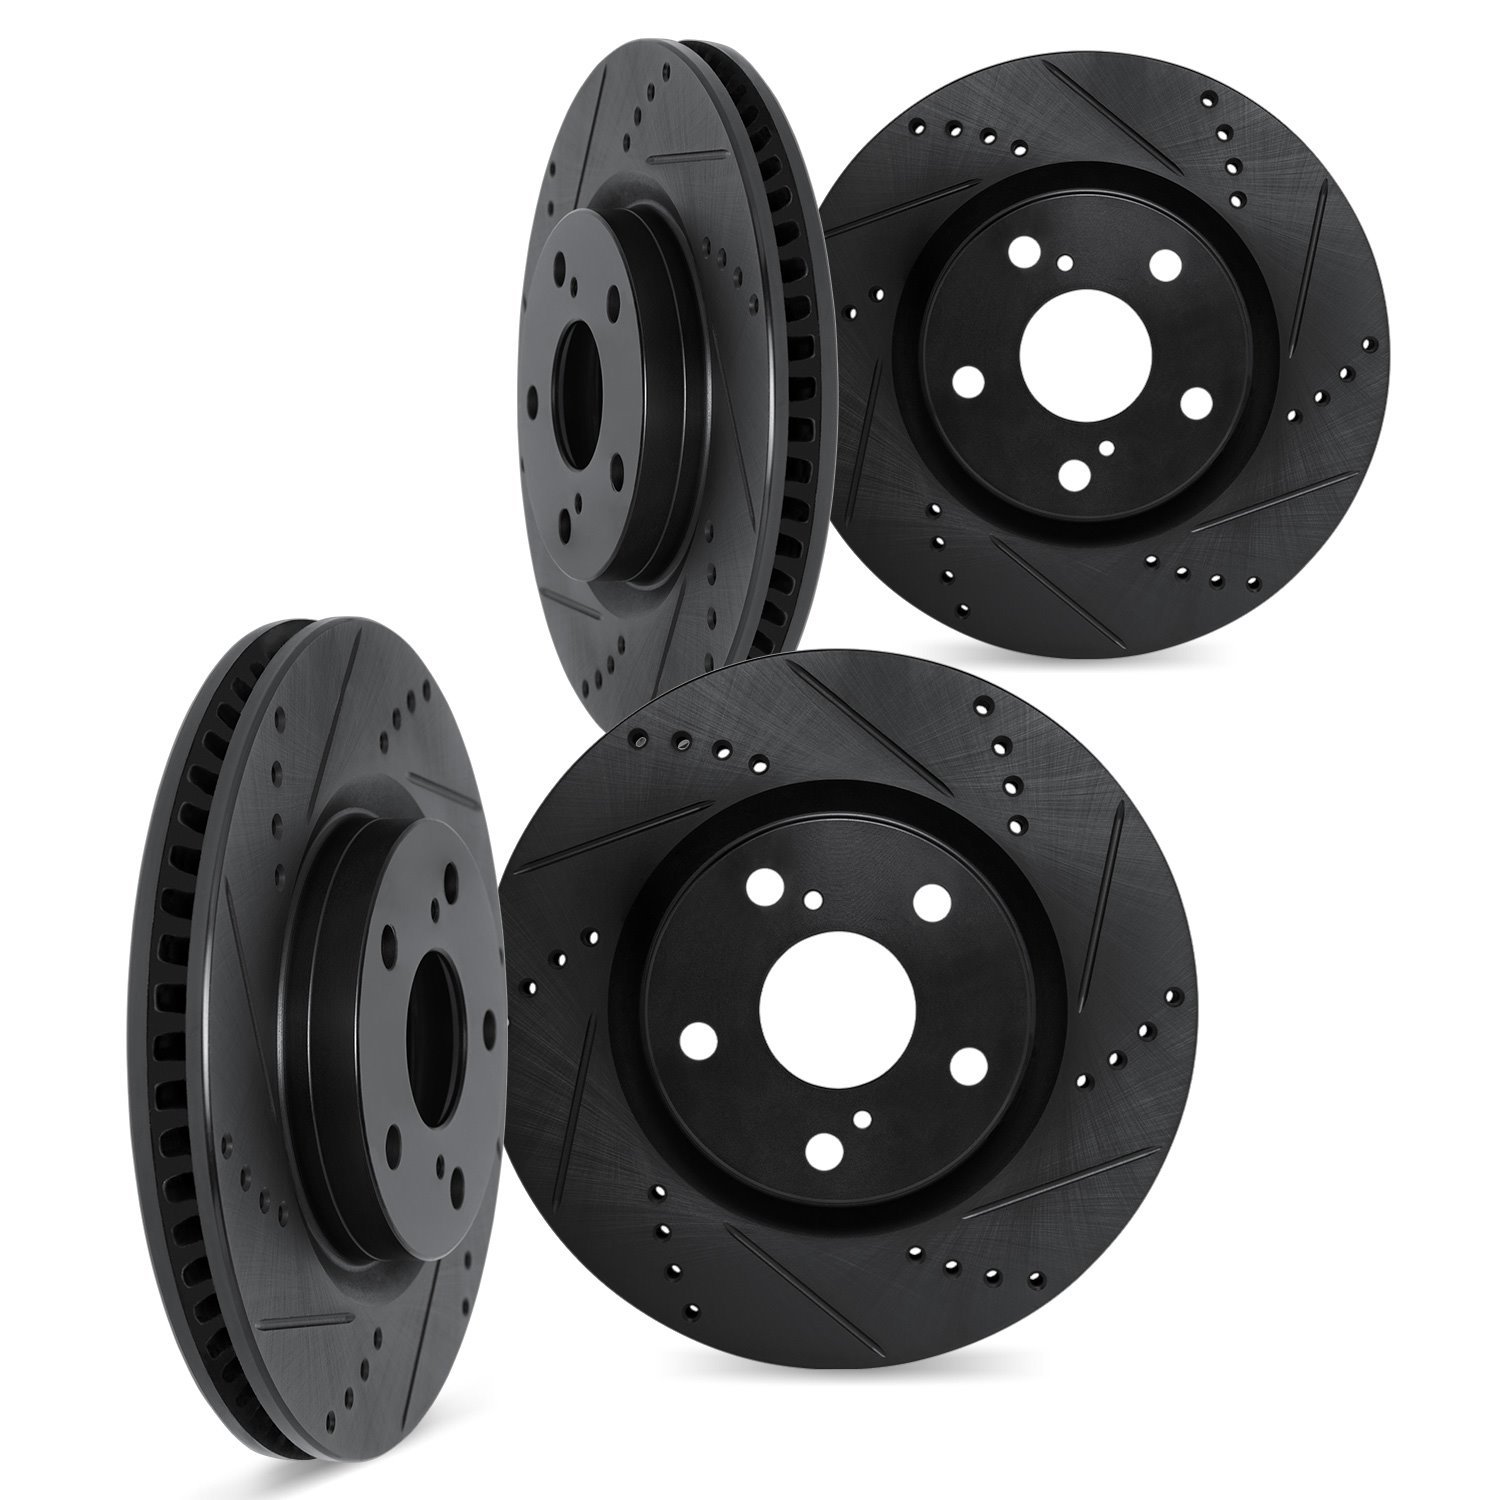 8004-31084 Drilled/Slotted Brake Rotors [Black], Fits Select Multiple Makes/Models, Position: Front and Rear